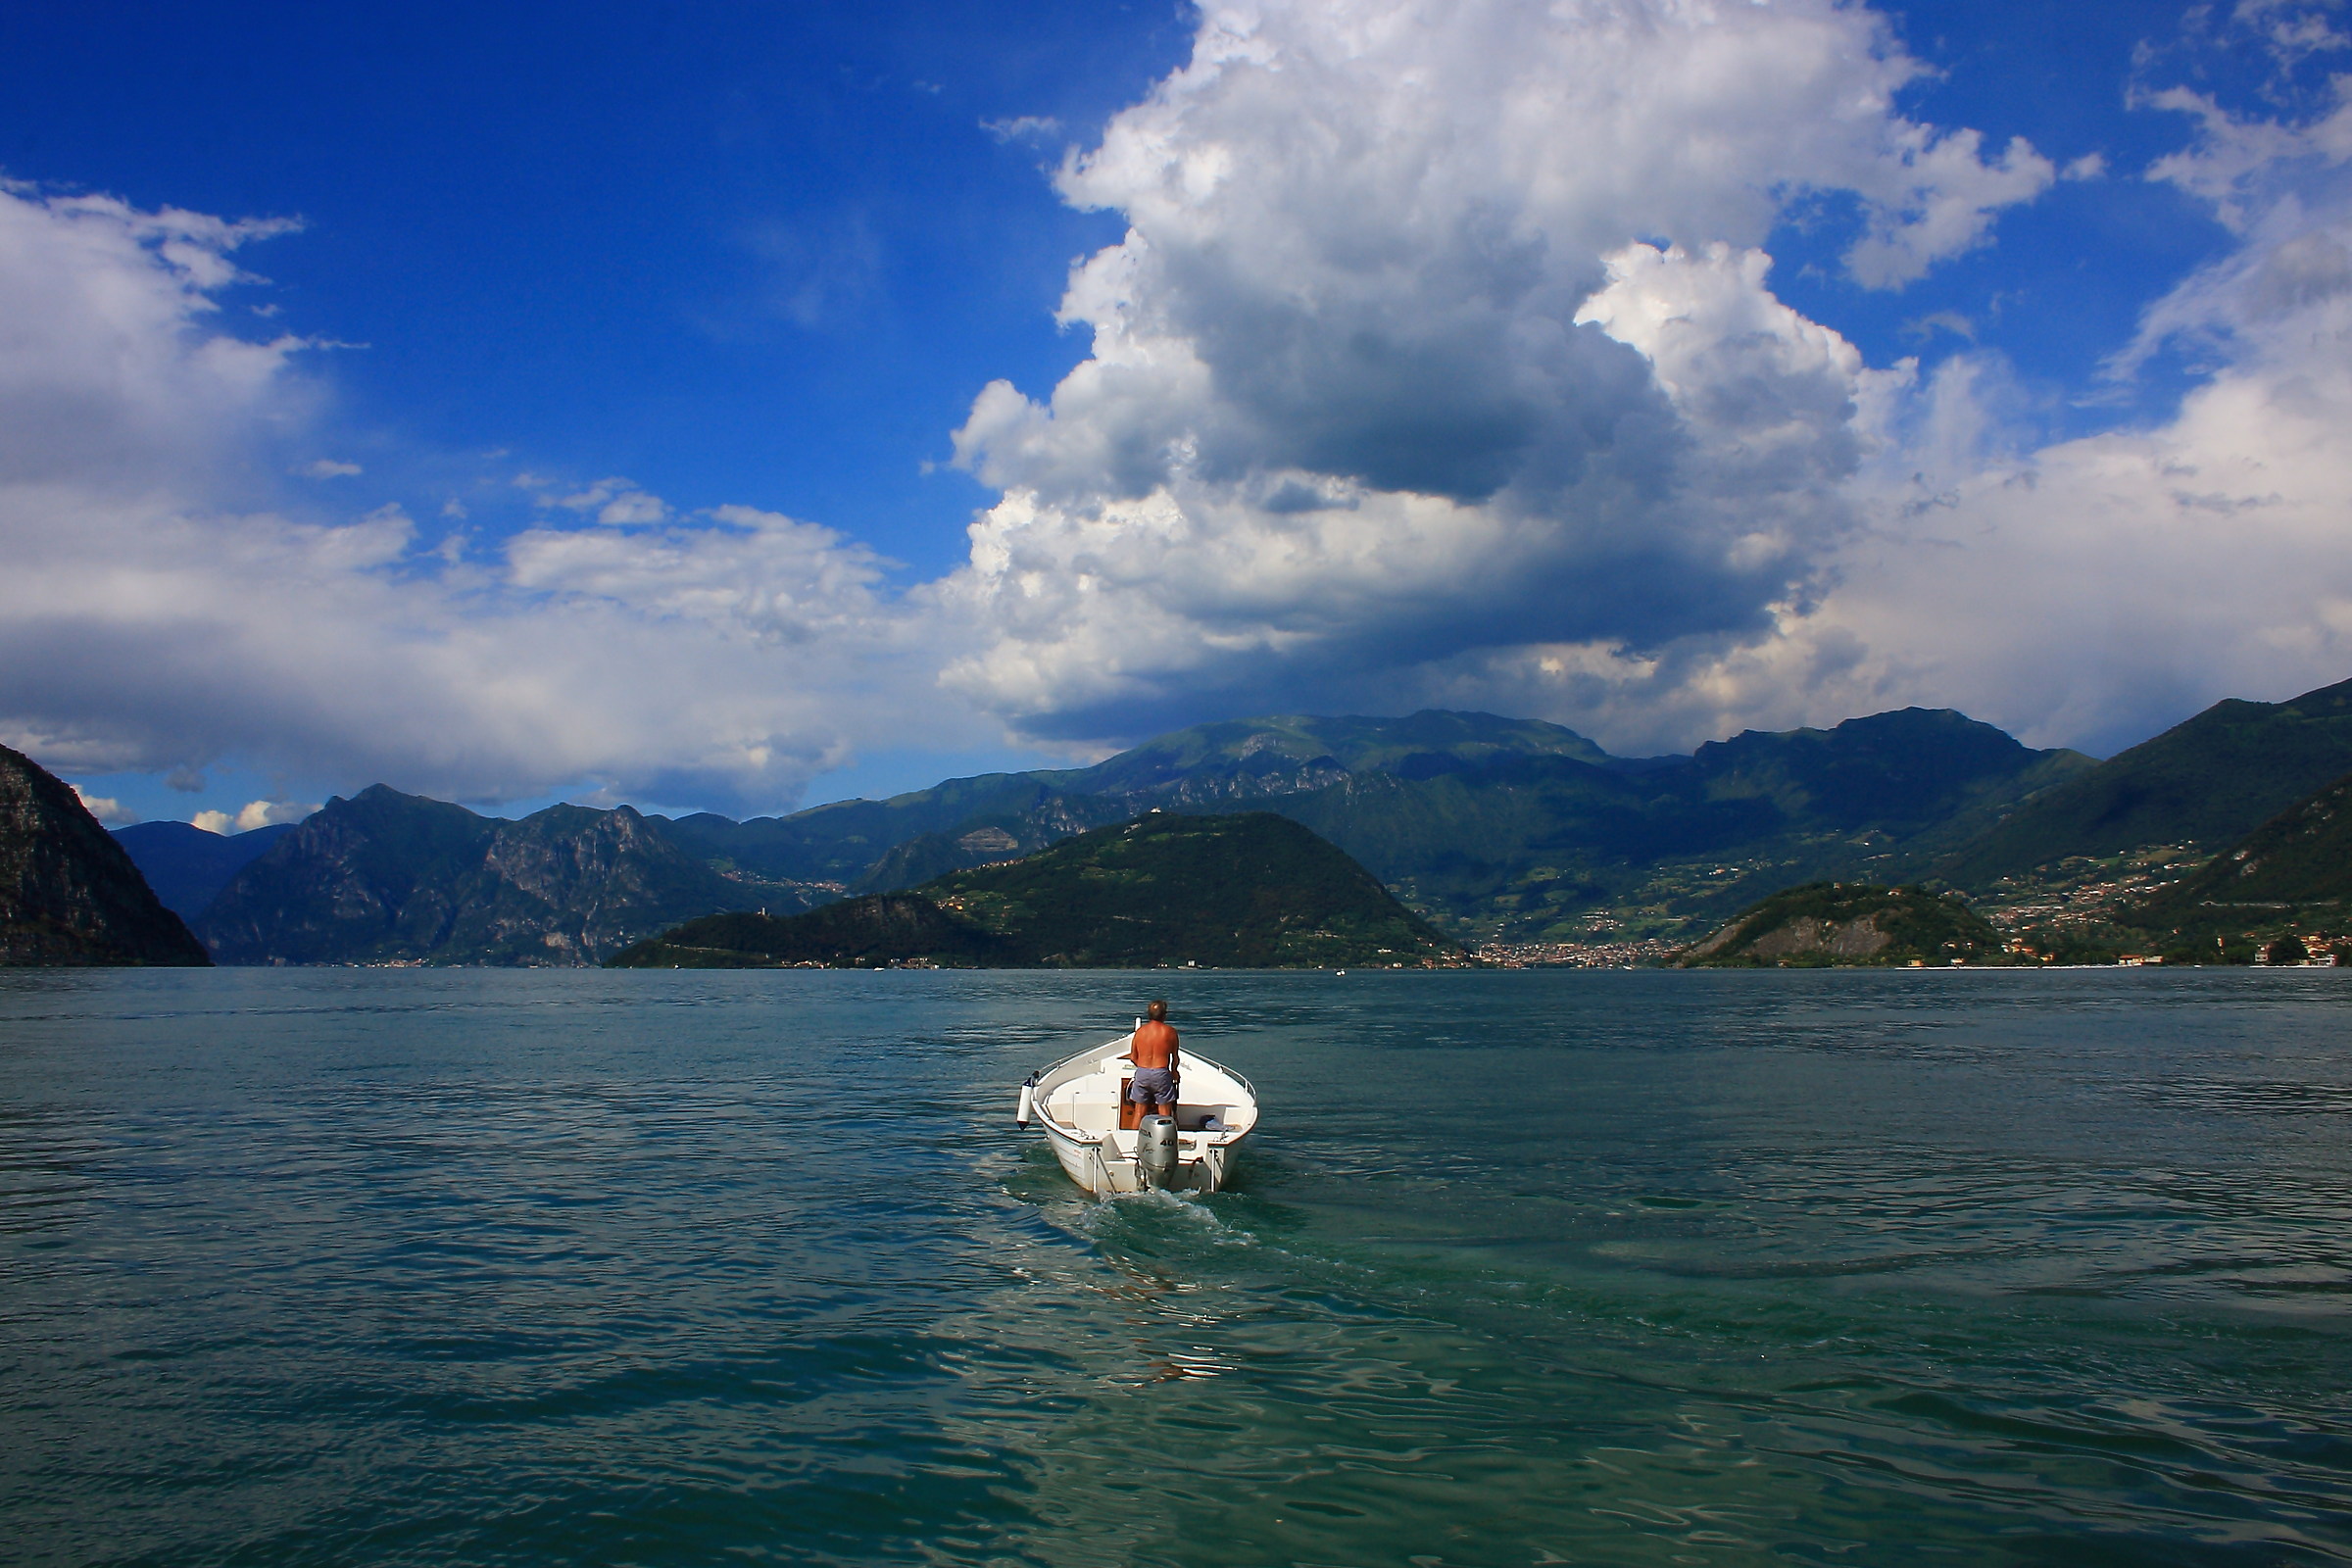 postcard from Lake Iseo...